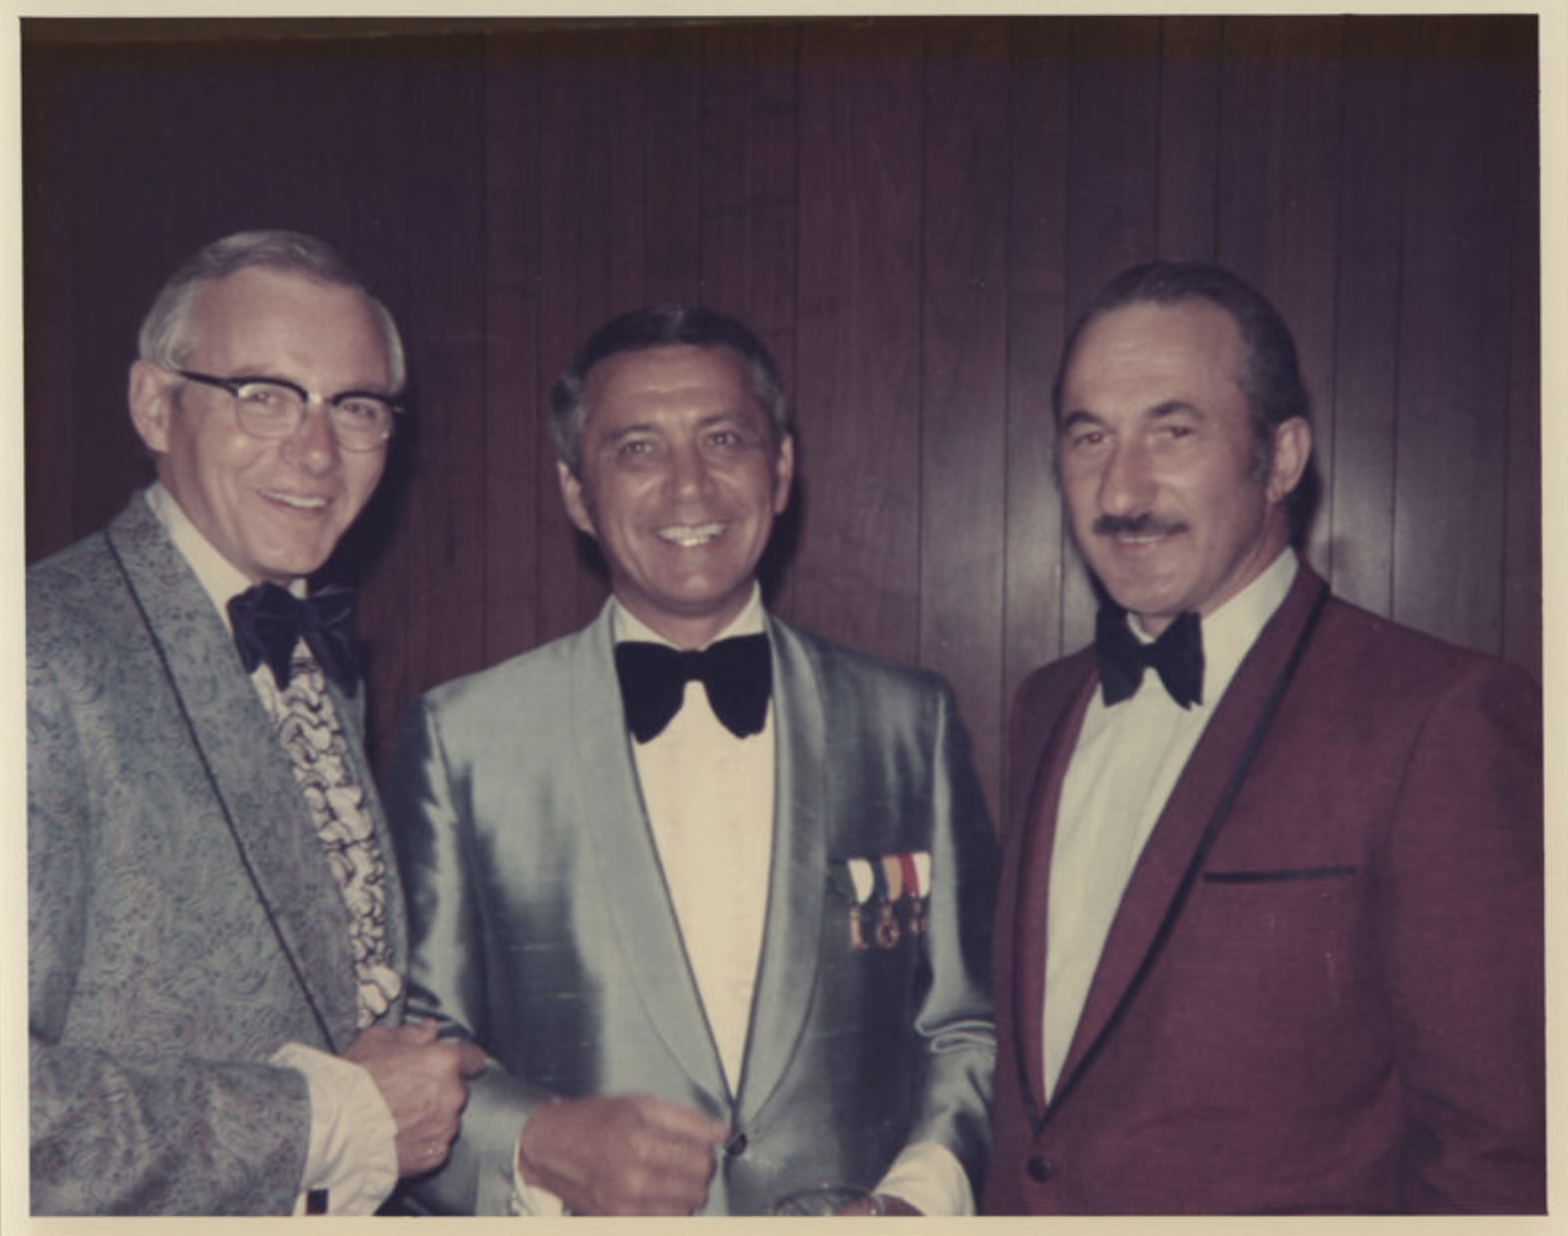 Three men, in evening wear with bow ties, are standing together.